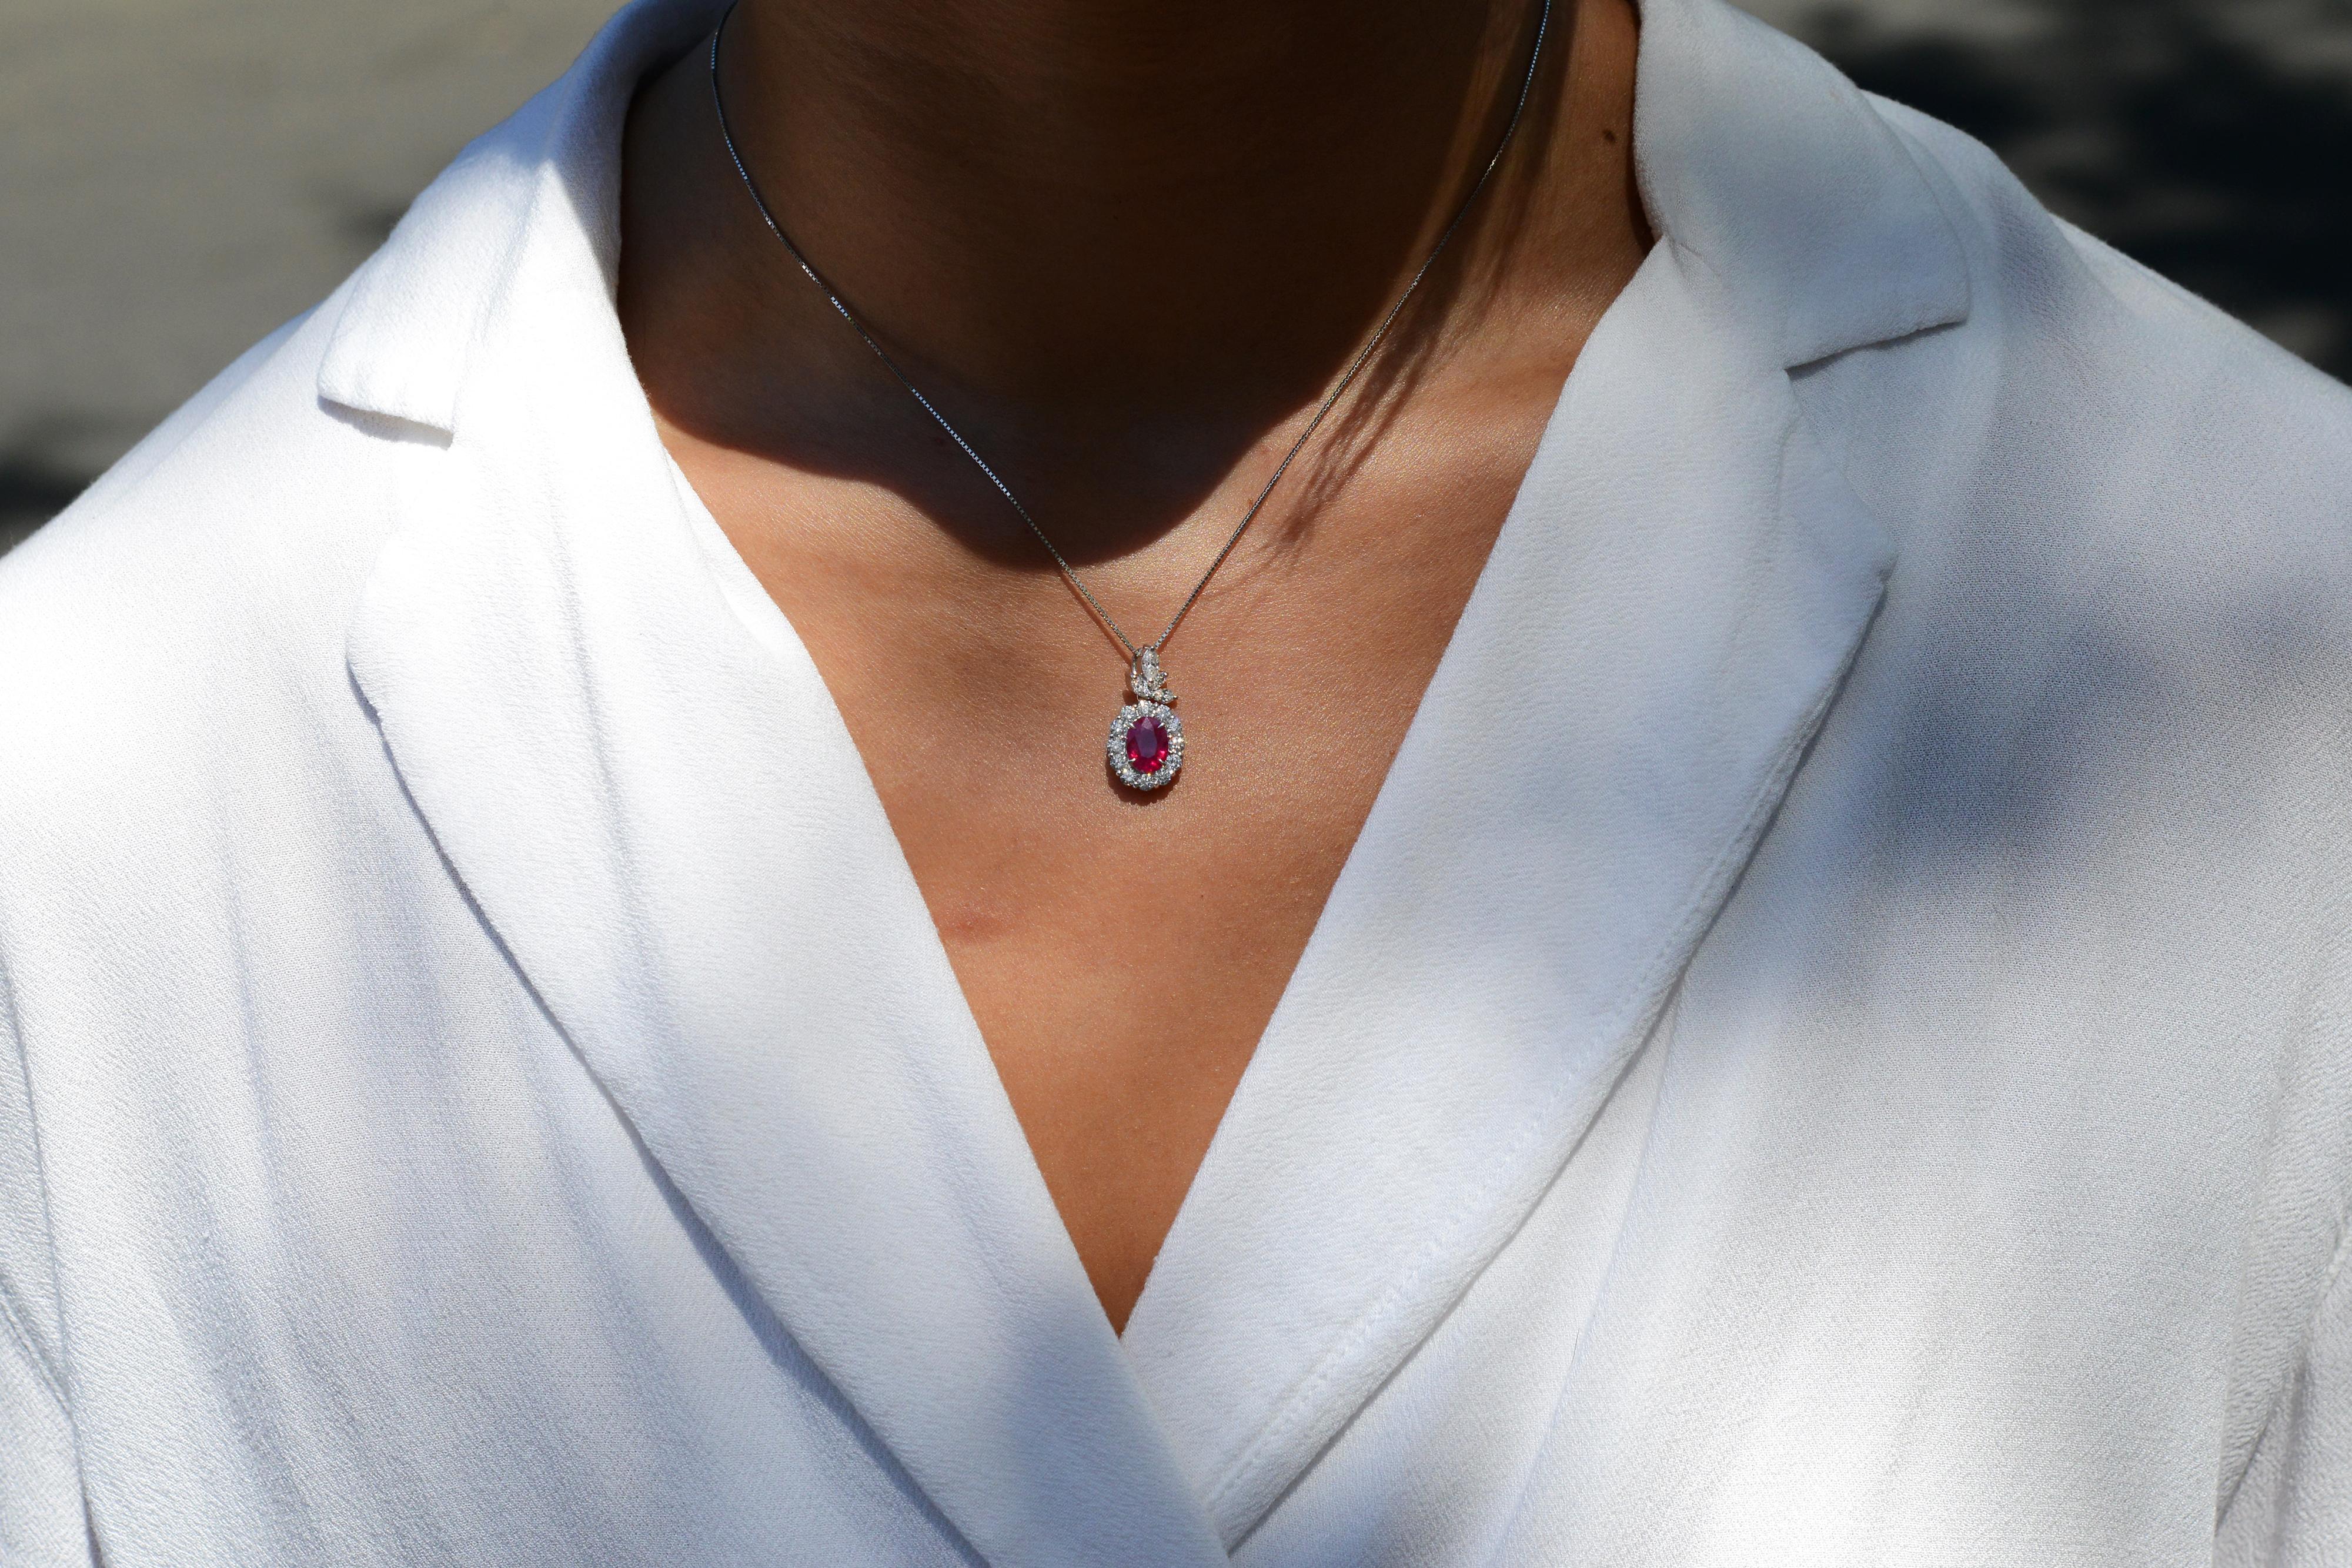 An early contemporary standout, this vintage pendant necklace will make a fabulous complement to your estate jewelry collection. The luxurious setting centers on a rare, GIA certified Burmese Pigeon Blood Red Ruby, accented by 1 carat of sparkling